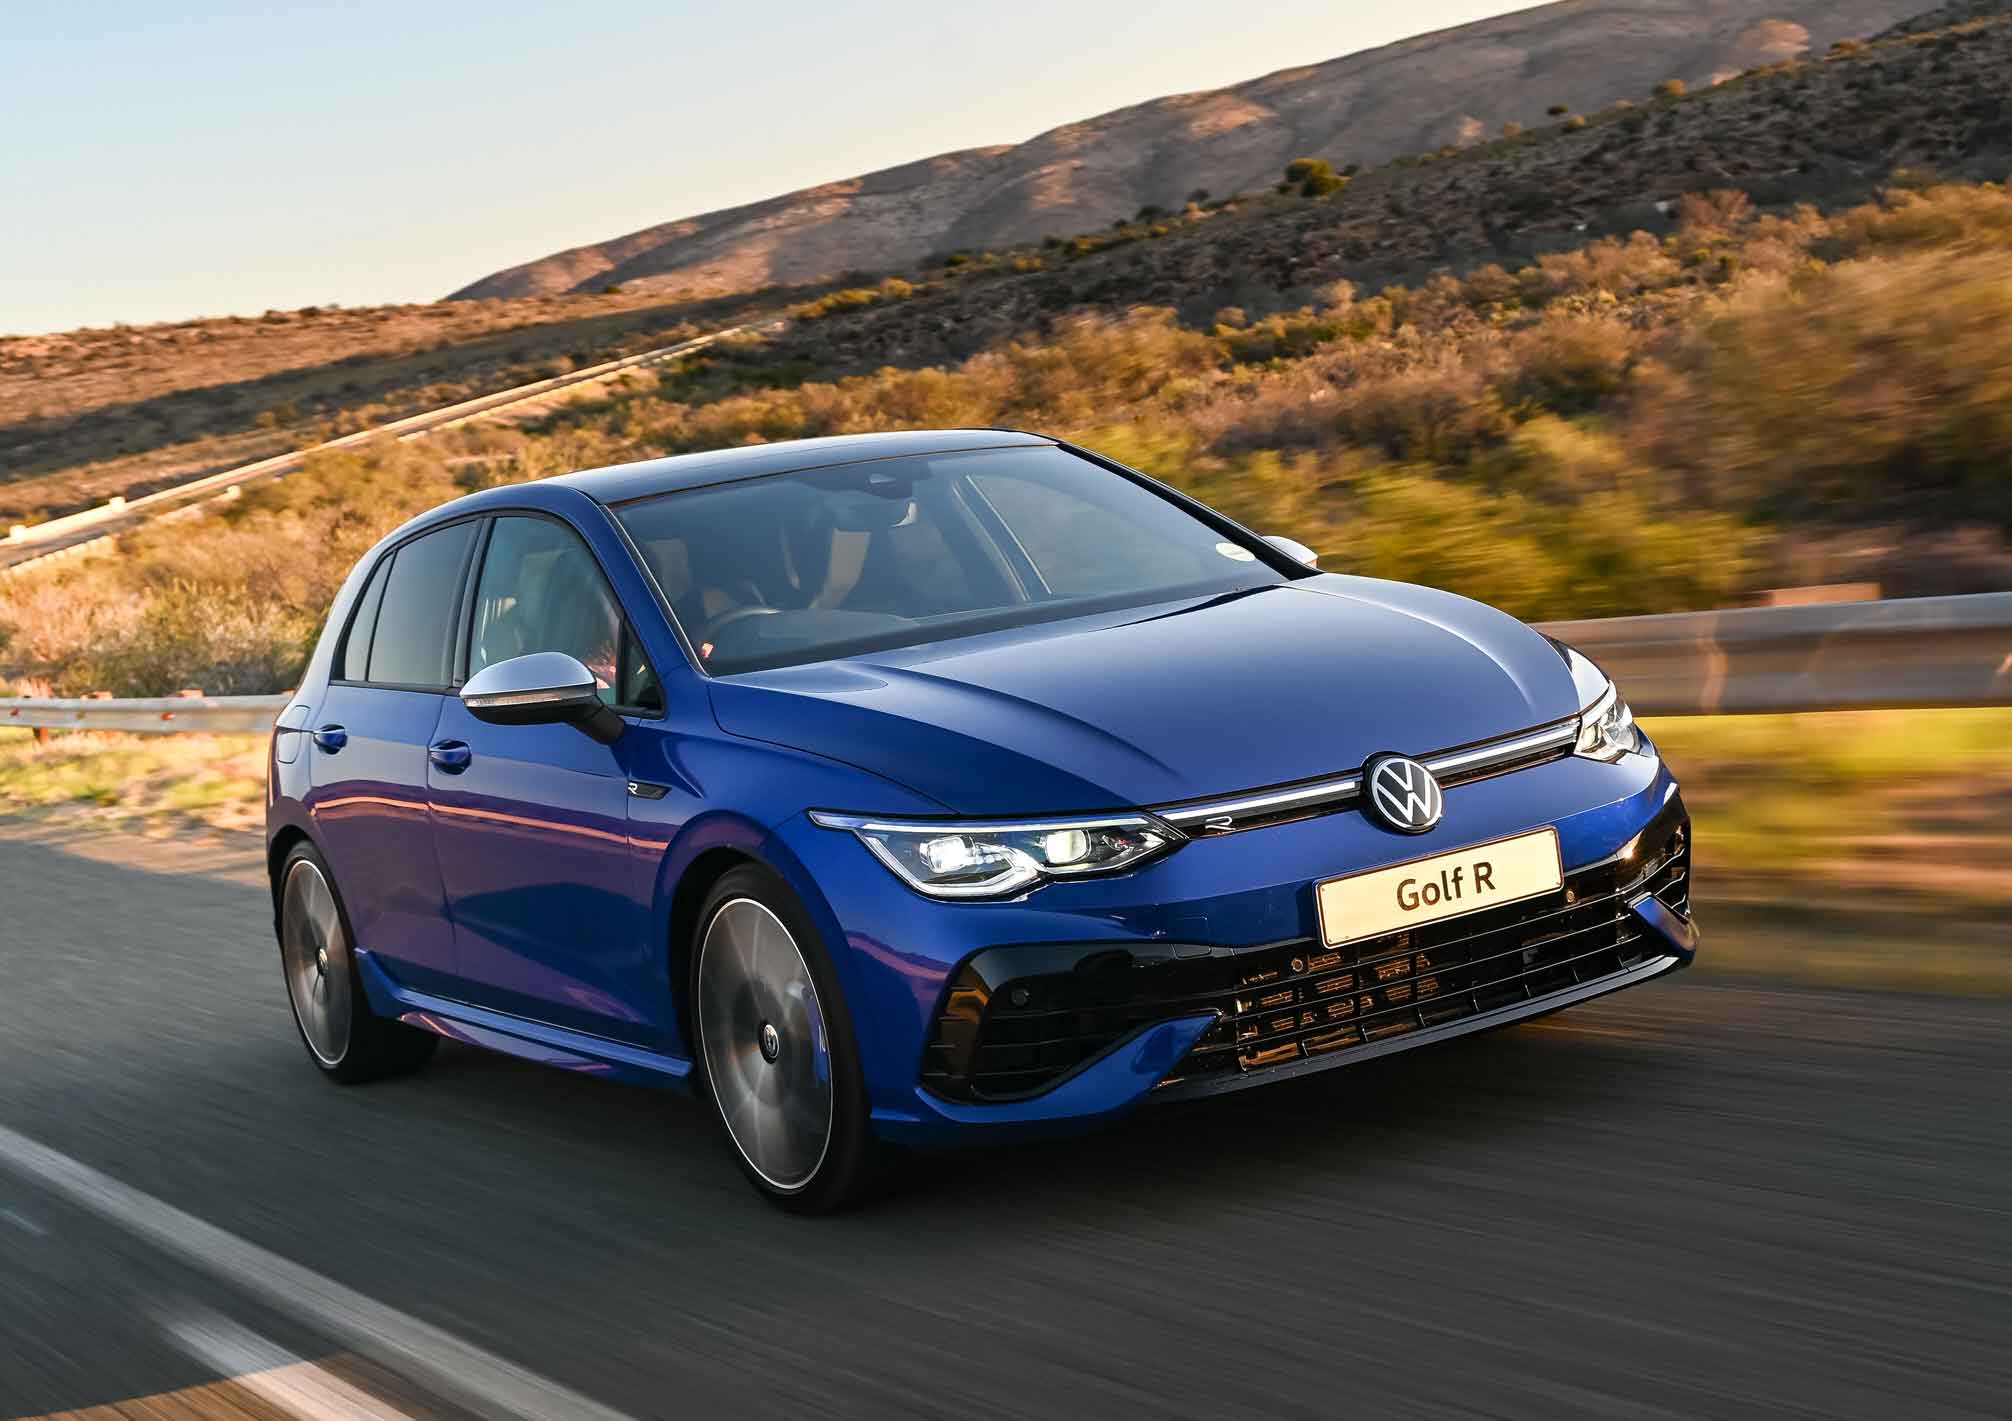 Volkswagen unveils the new Golf 8 R with 235kW